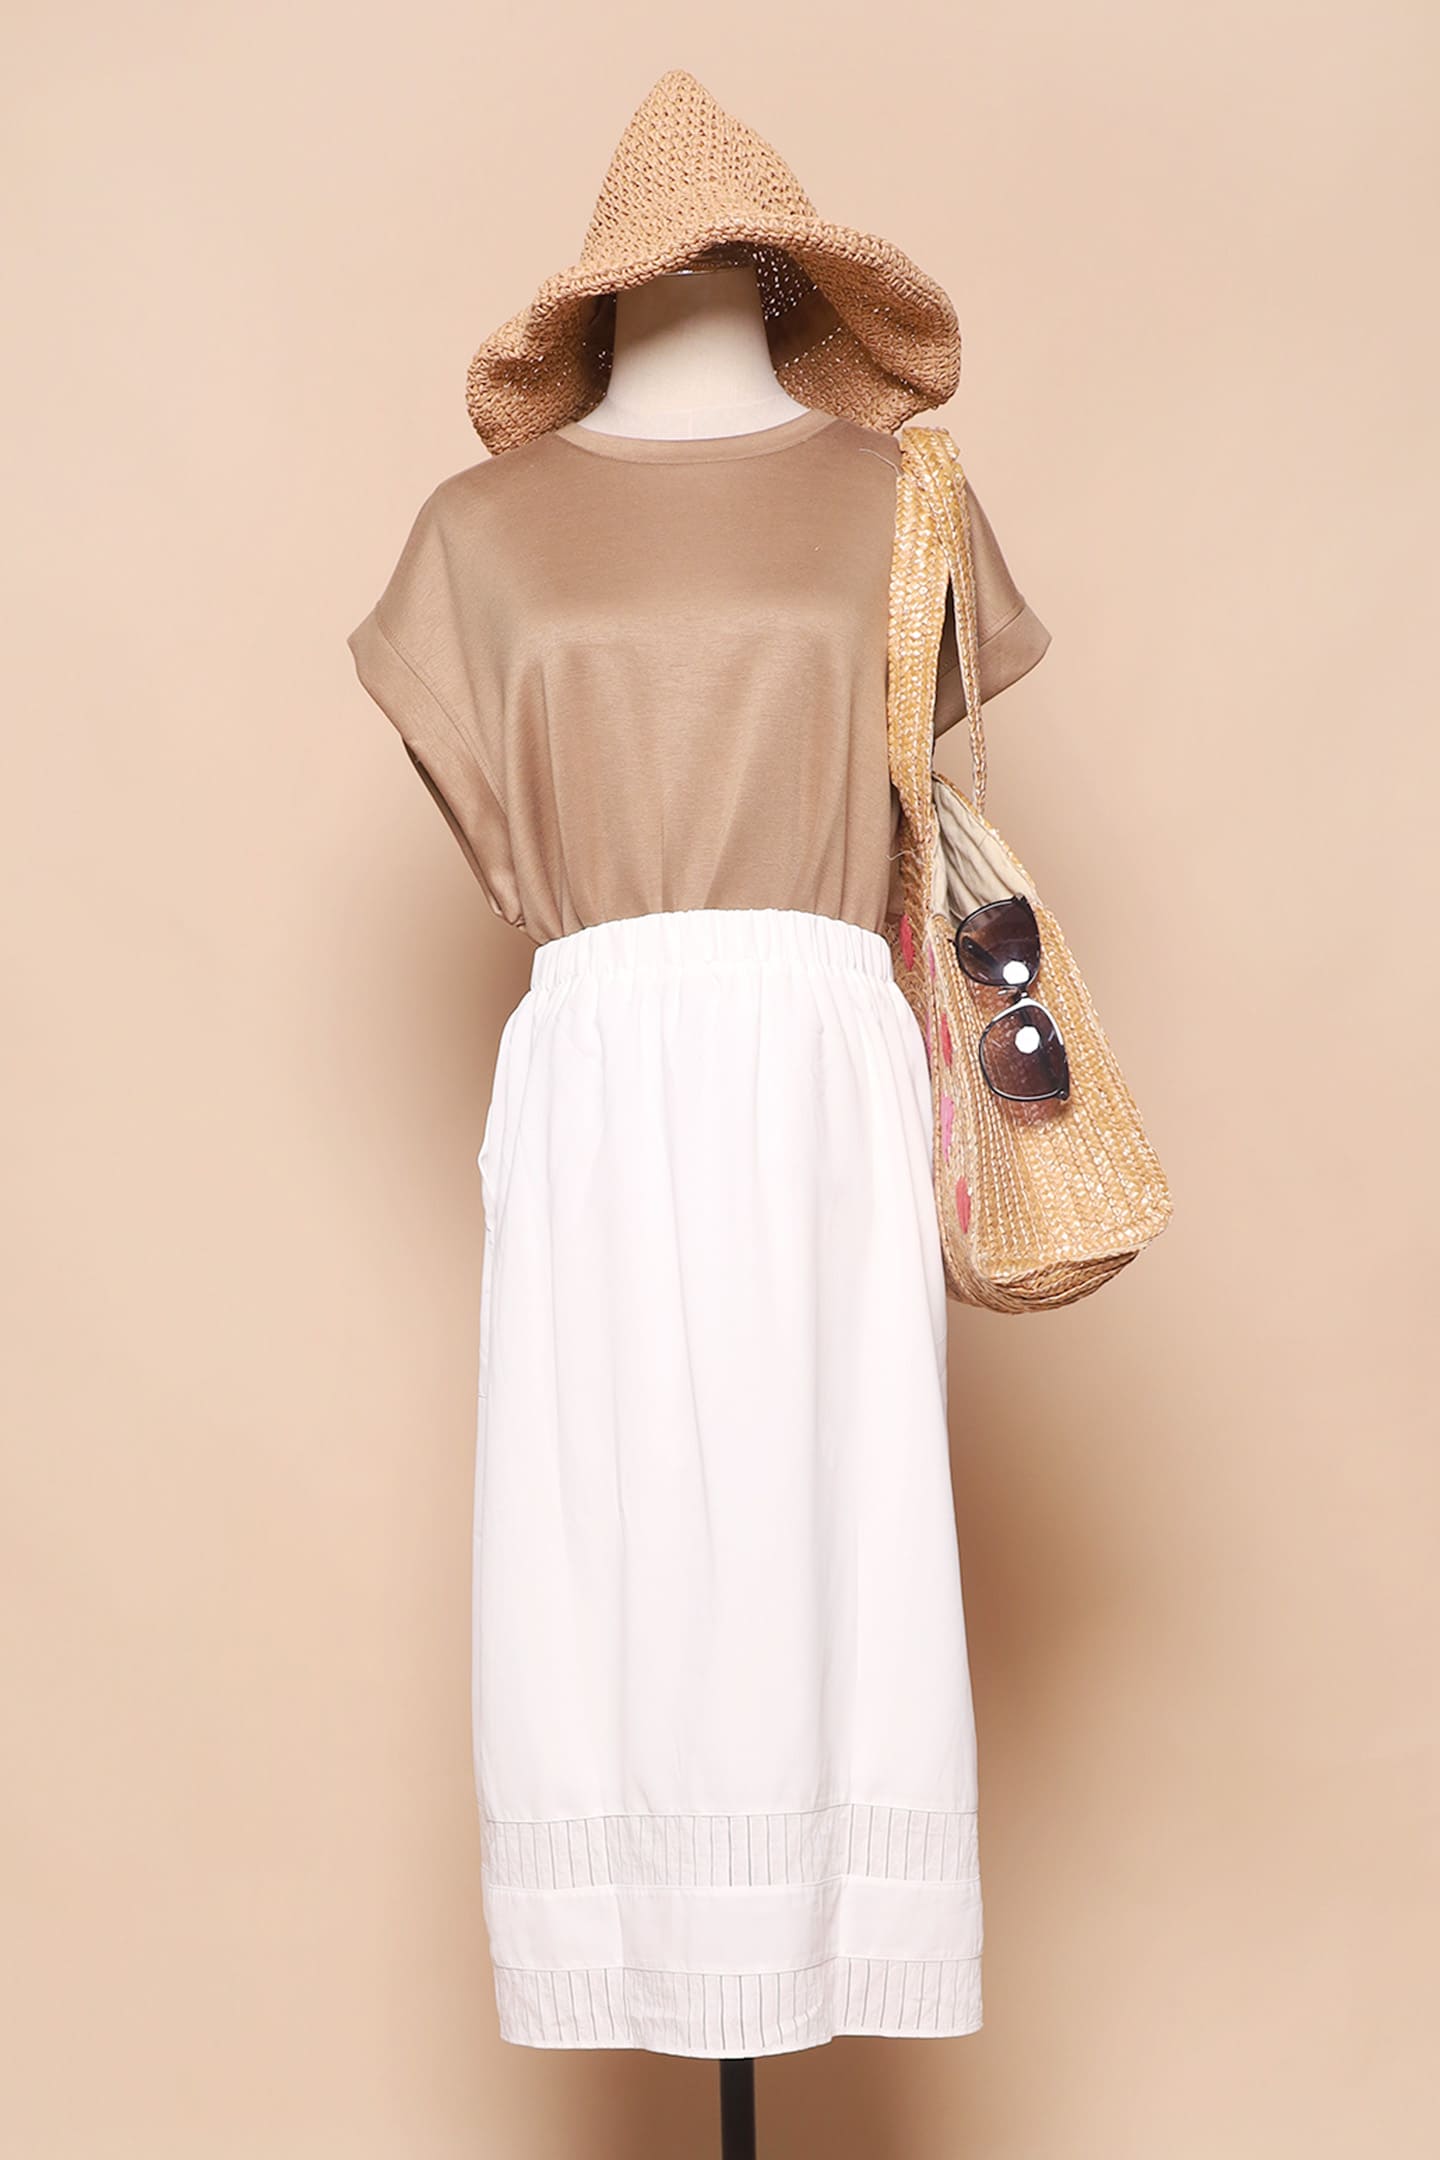 PO - Coco Top in Brown